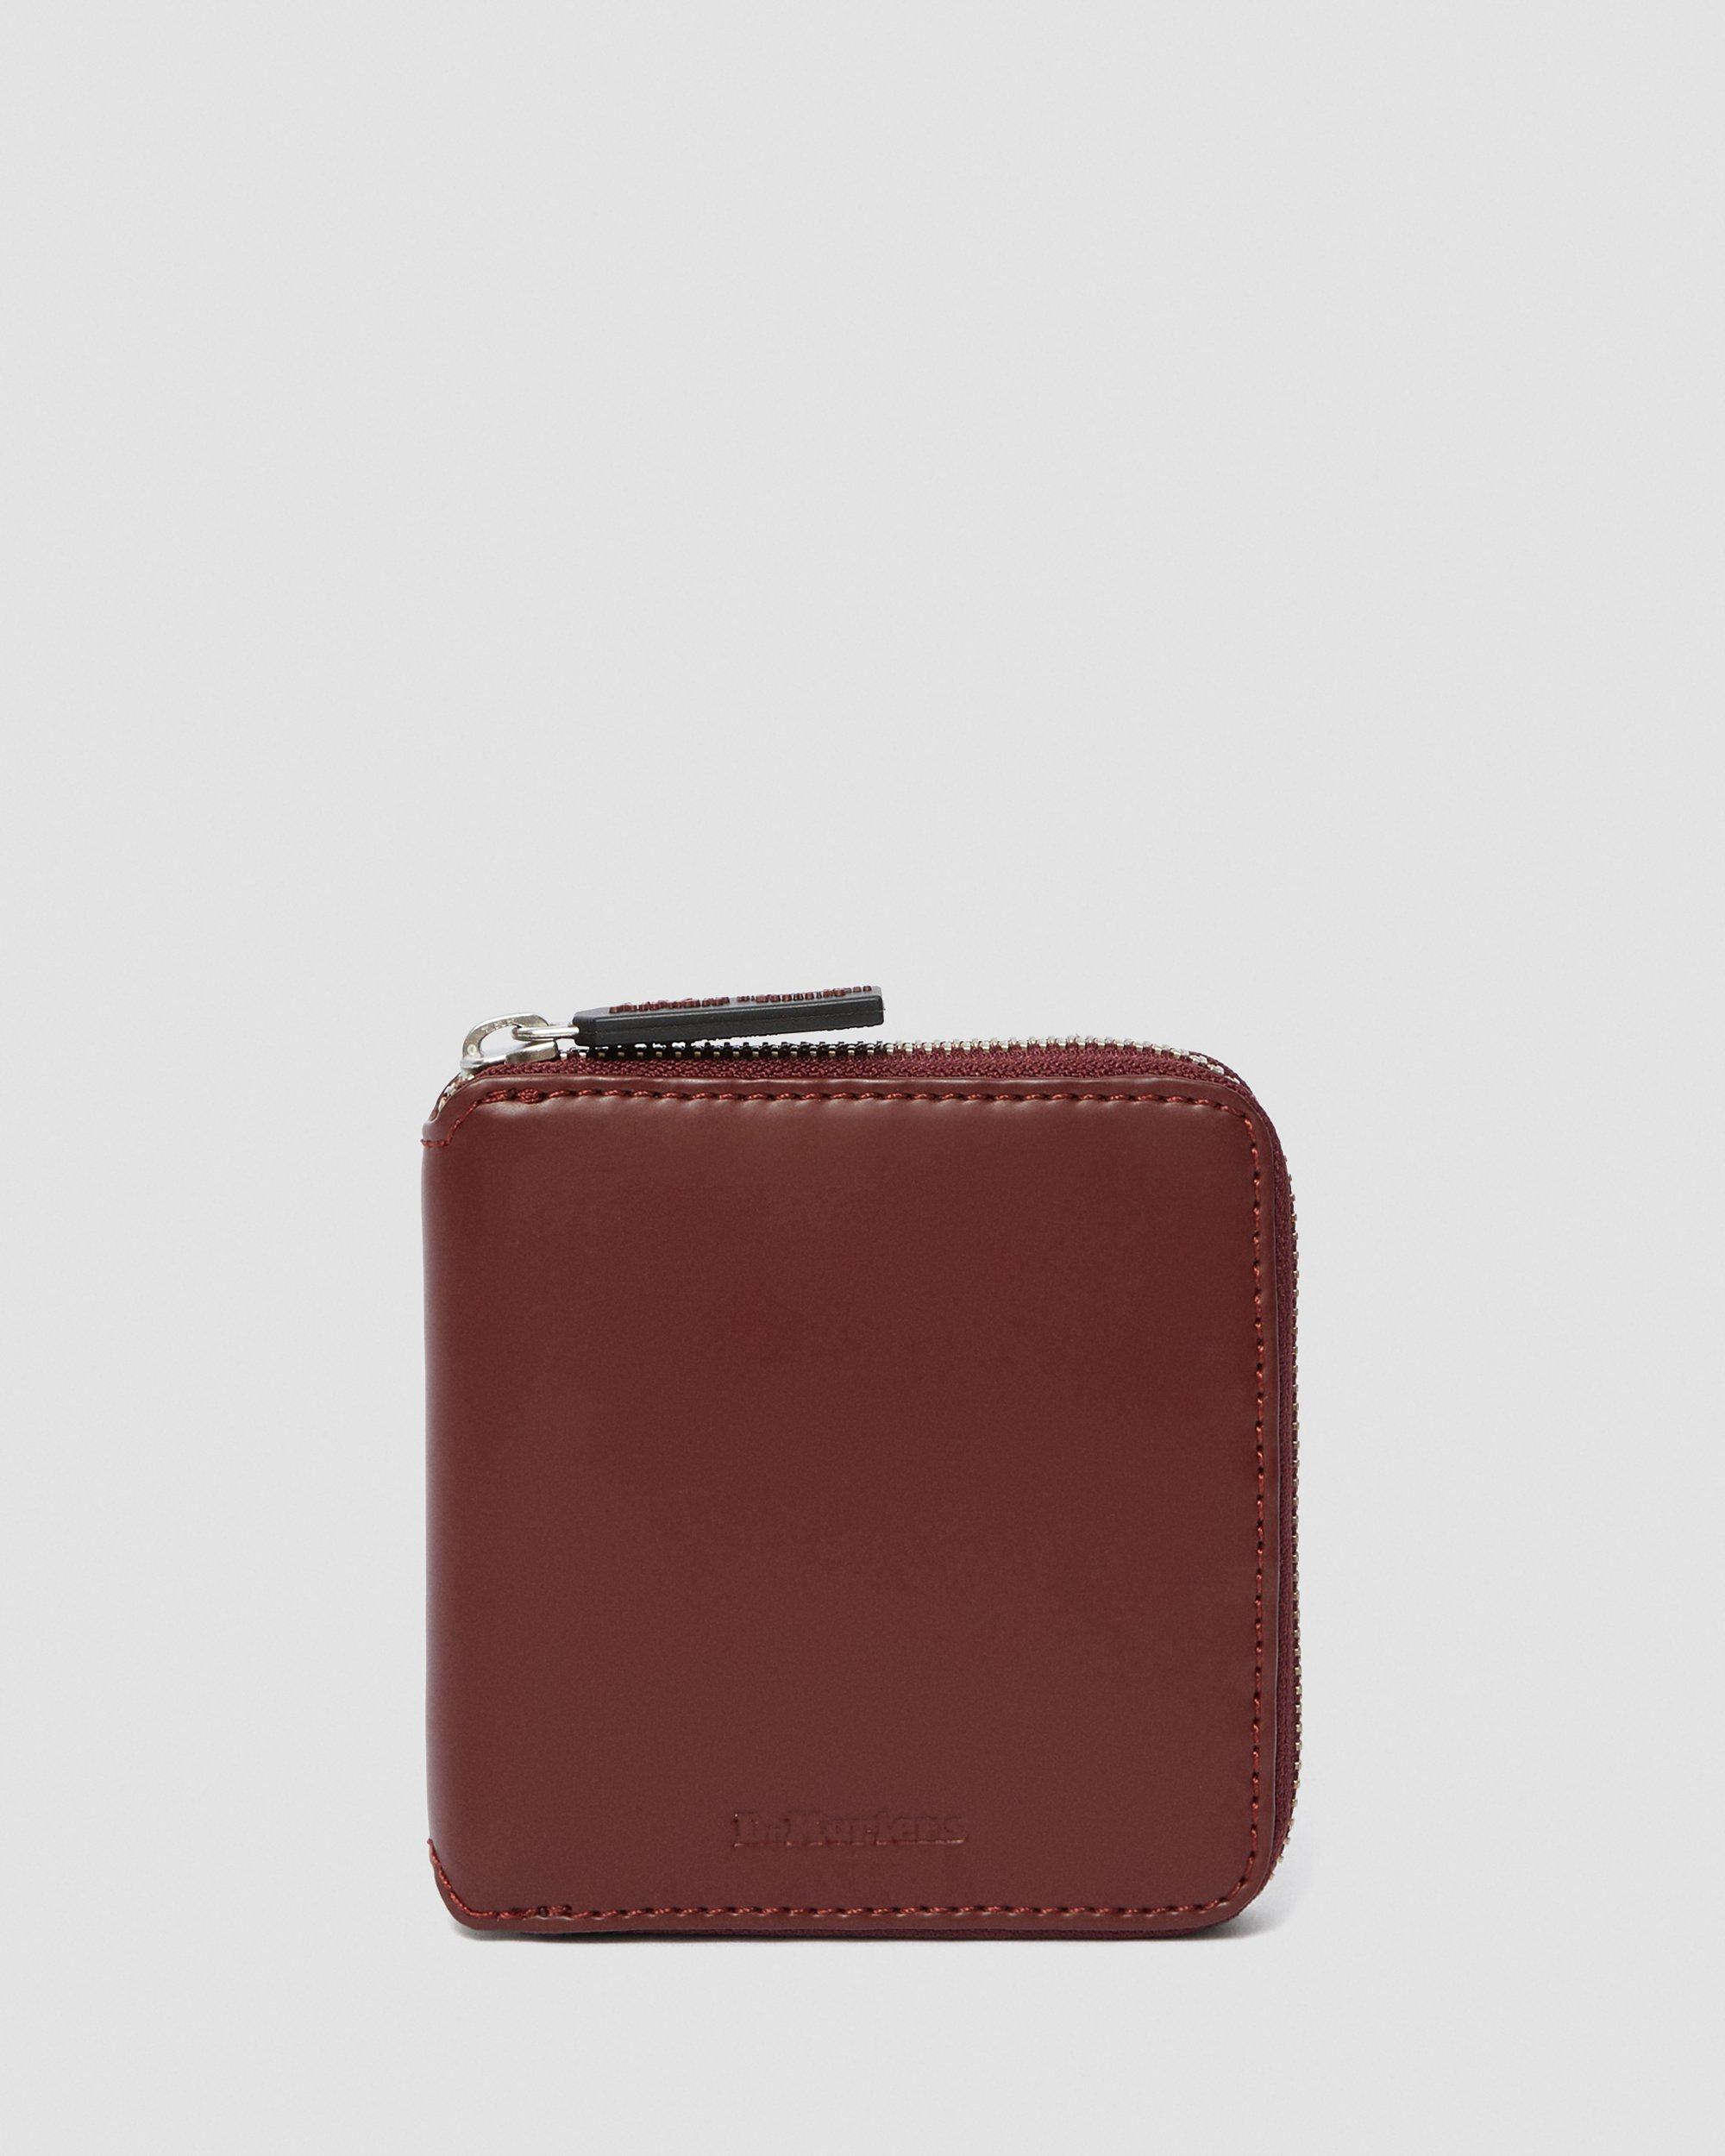 Dr. Martens, Bags, Dr Martens Kiev Cherry Red Leather Zip Wallet